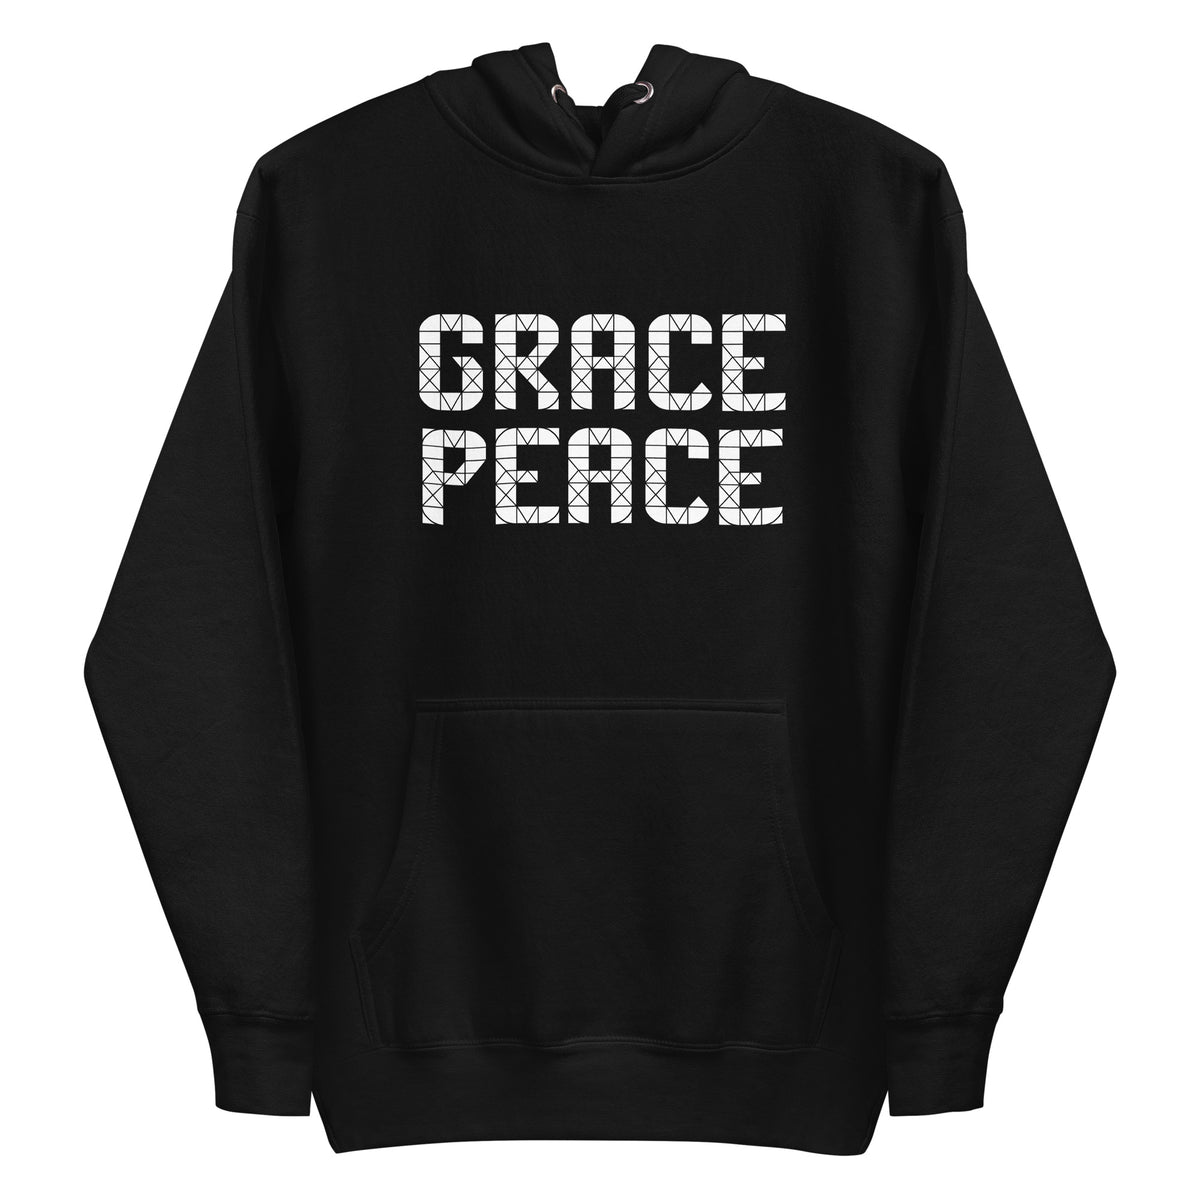 Grace and Peace - Unisex Hoodie